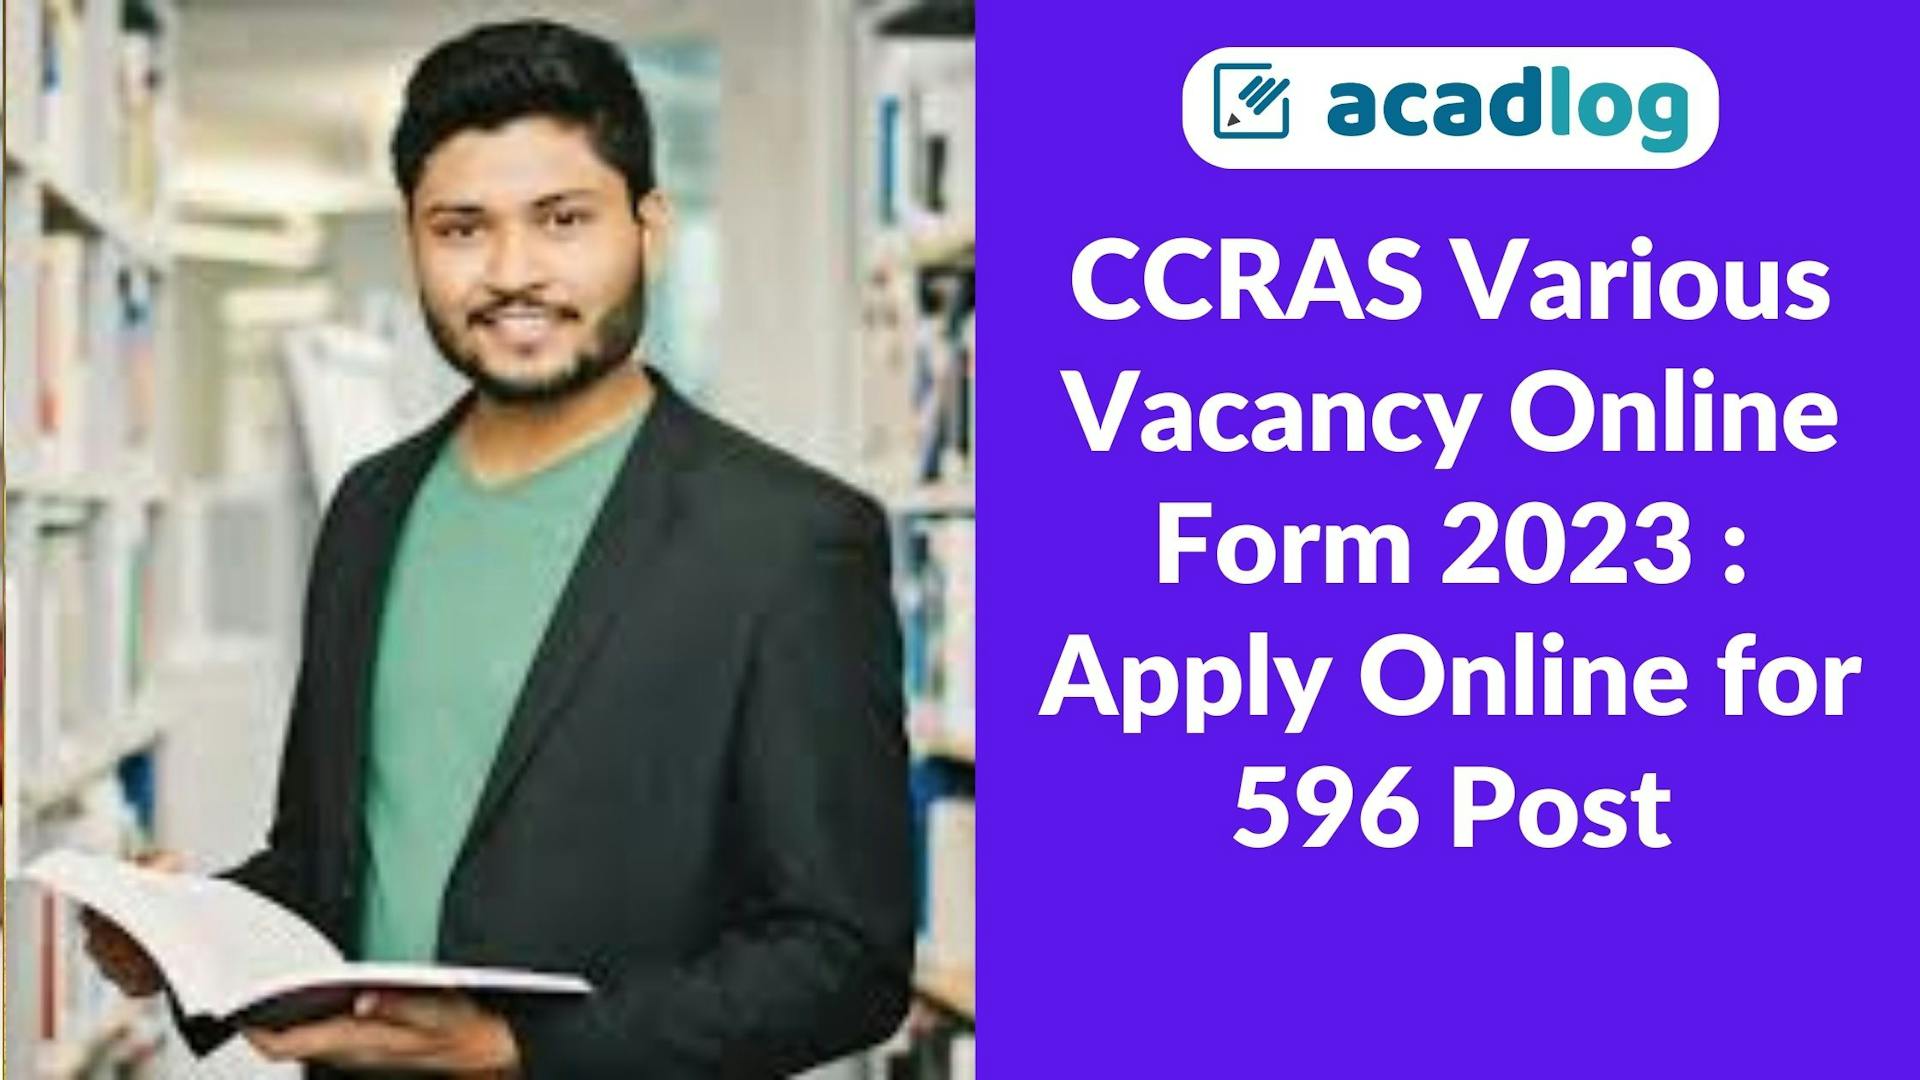 CCRAS Various Vacancy Online Form 2023 : Apply Online for 596 Post